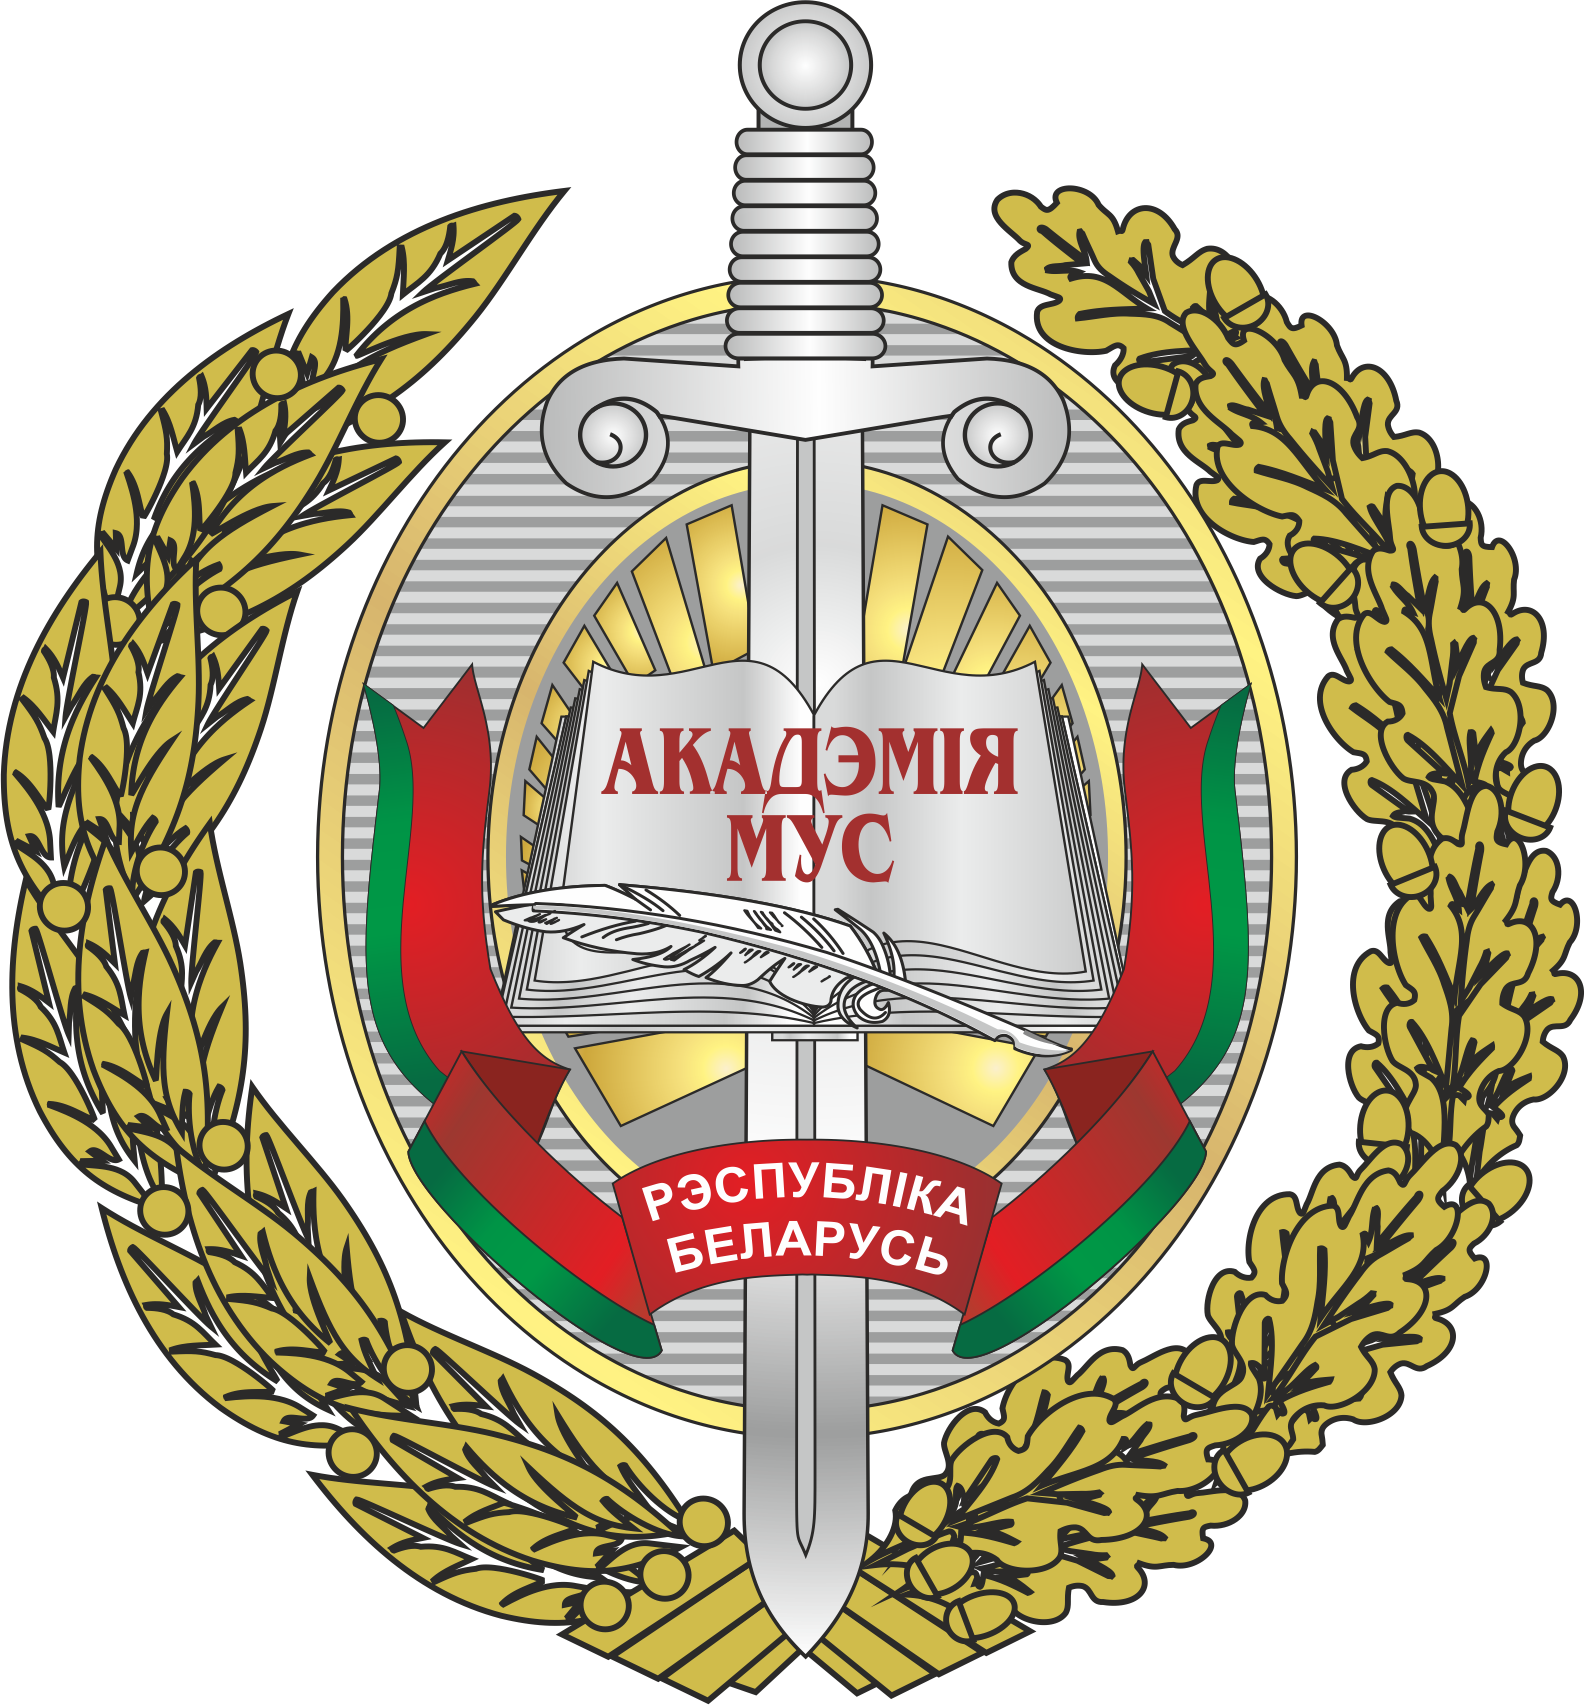 Academy of the Ministry of Internal Affairs of the Republic of Belarus